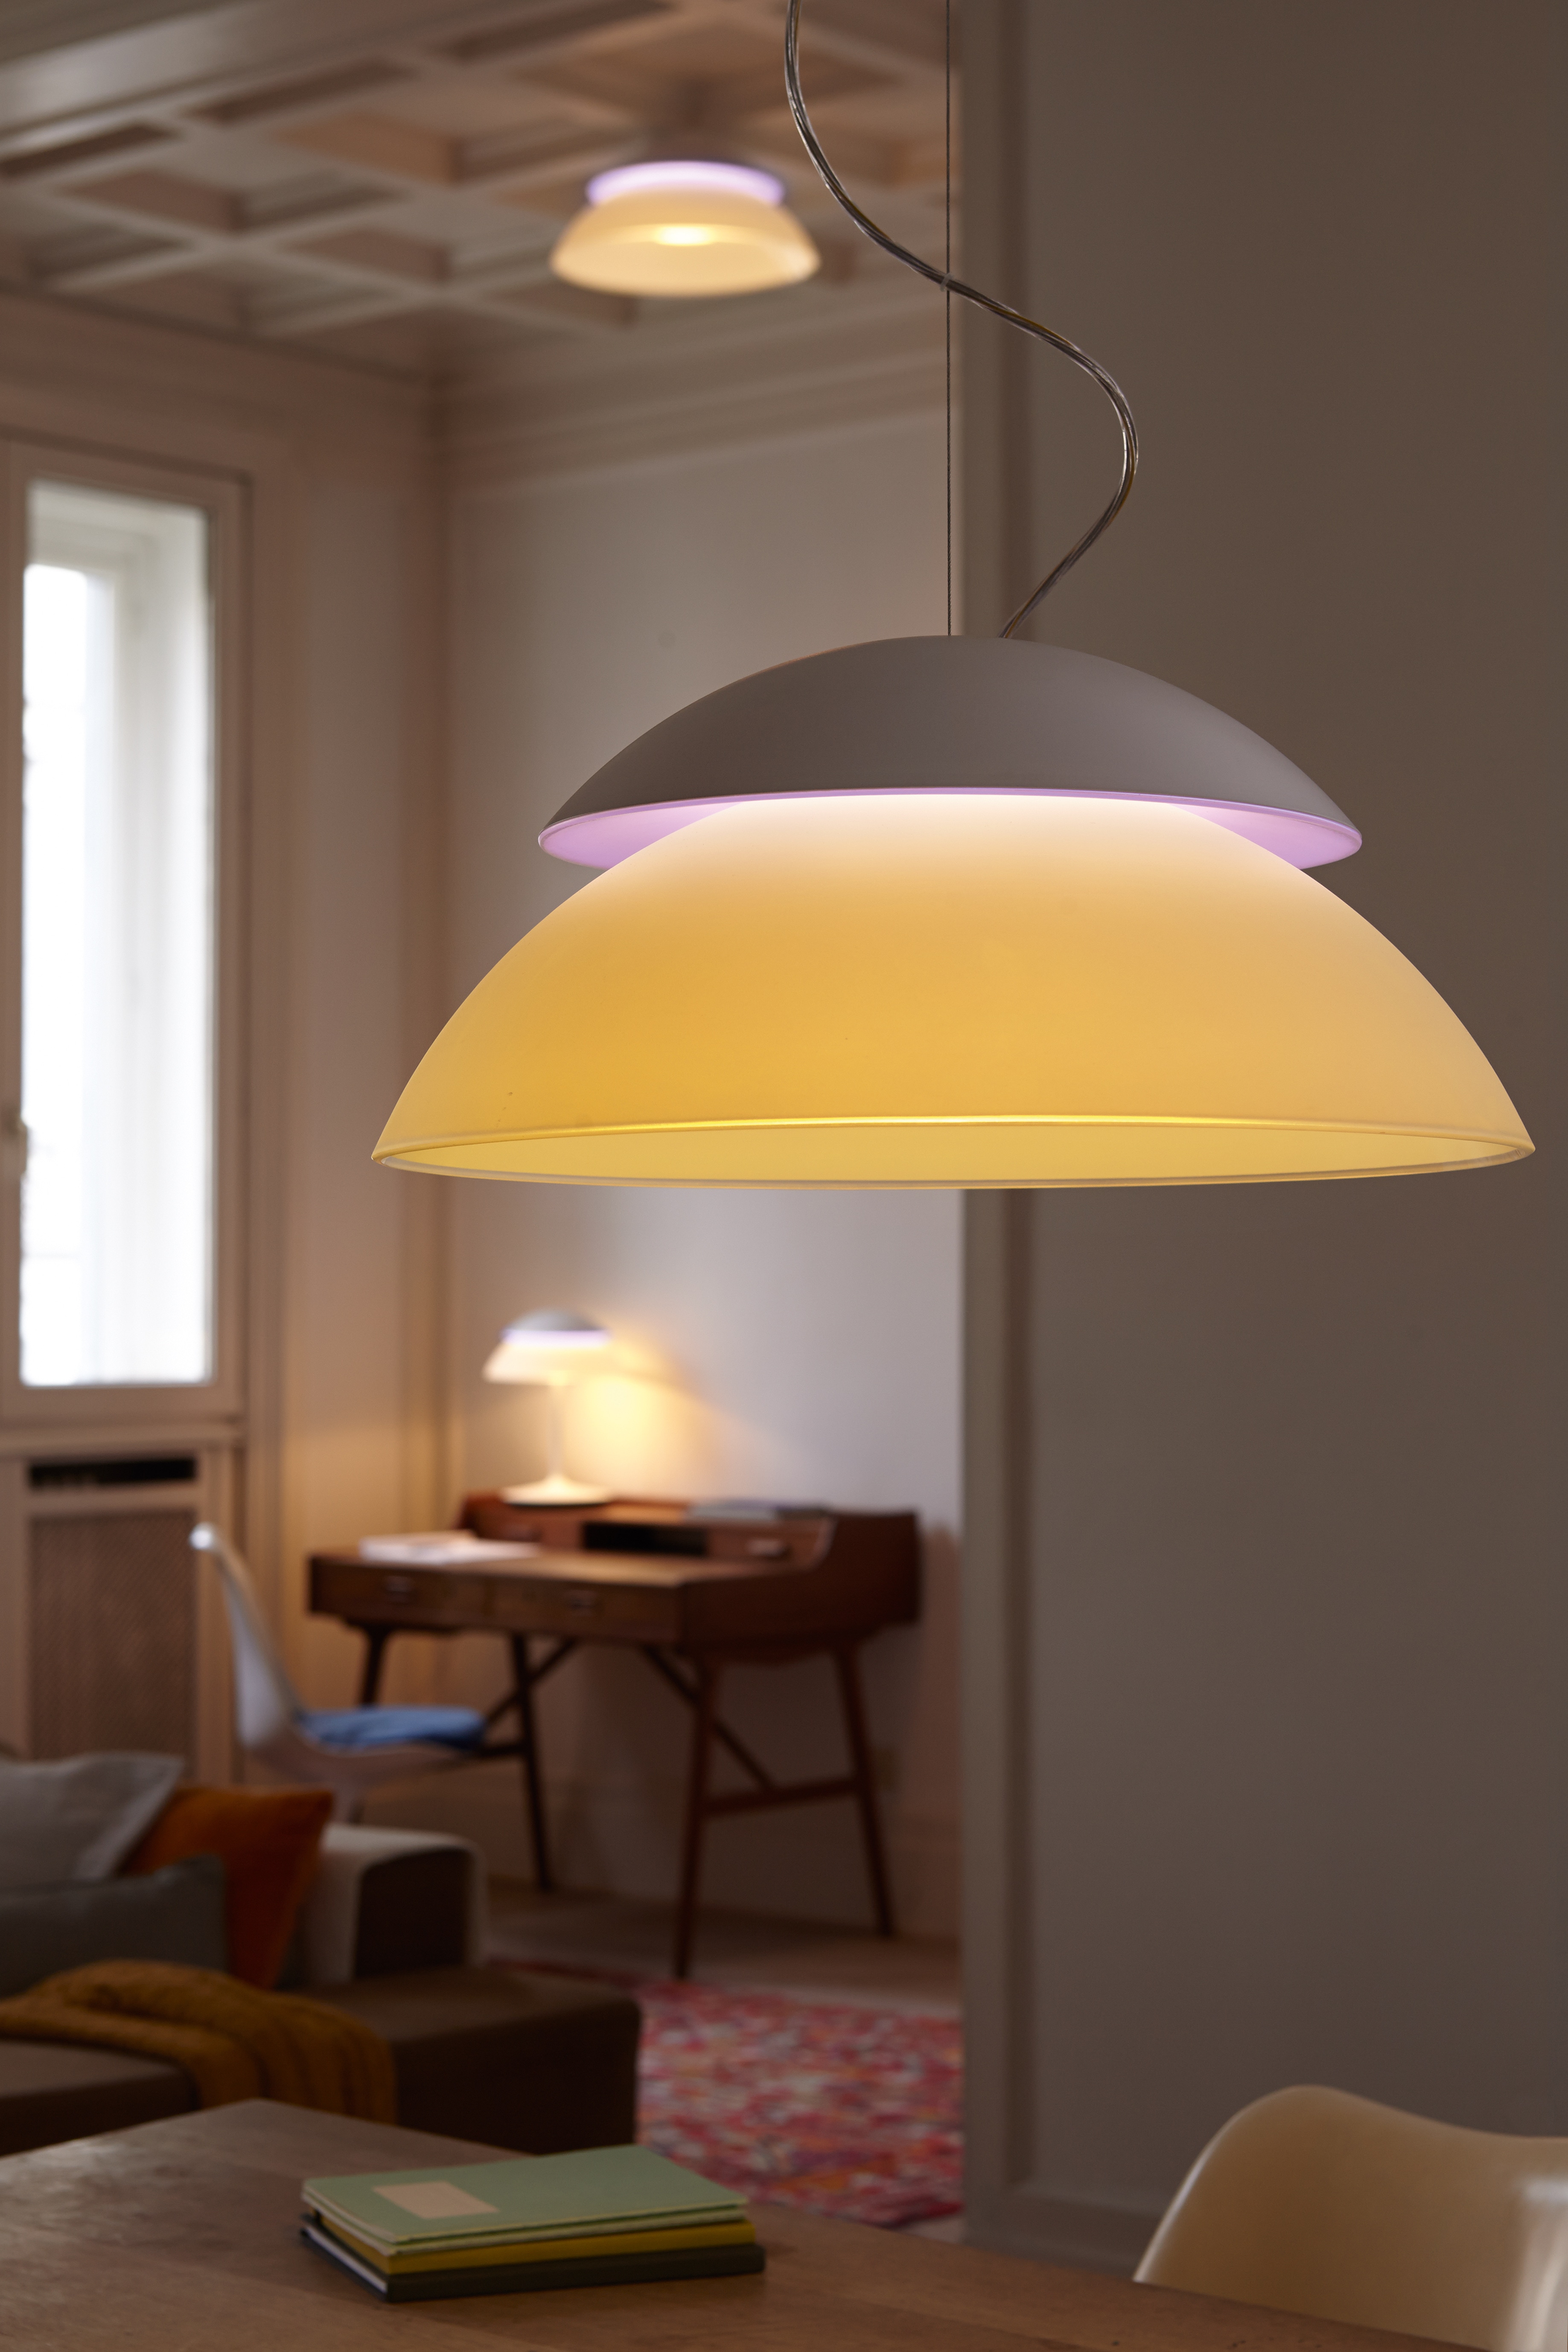 the ultimate light experience the new Philips Beyond